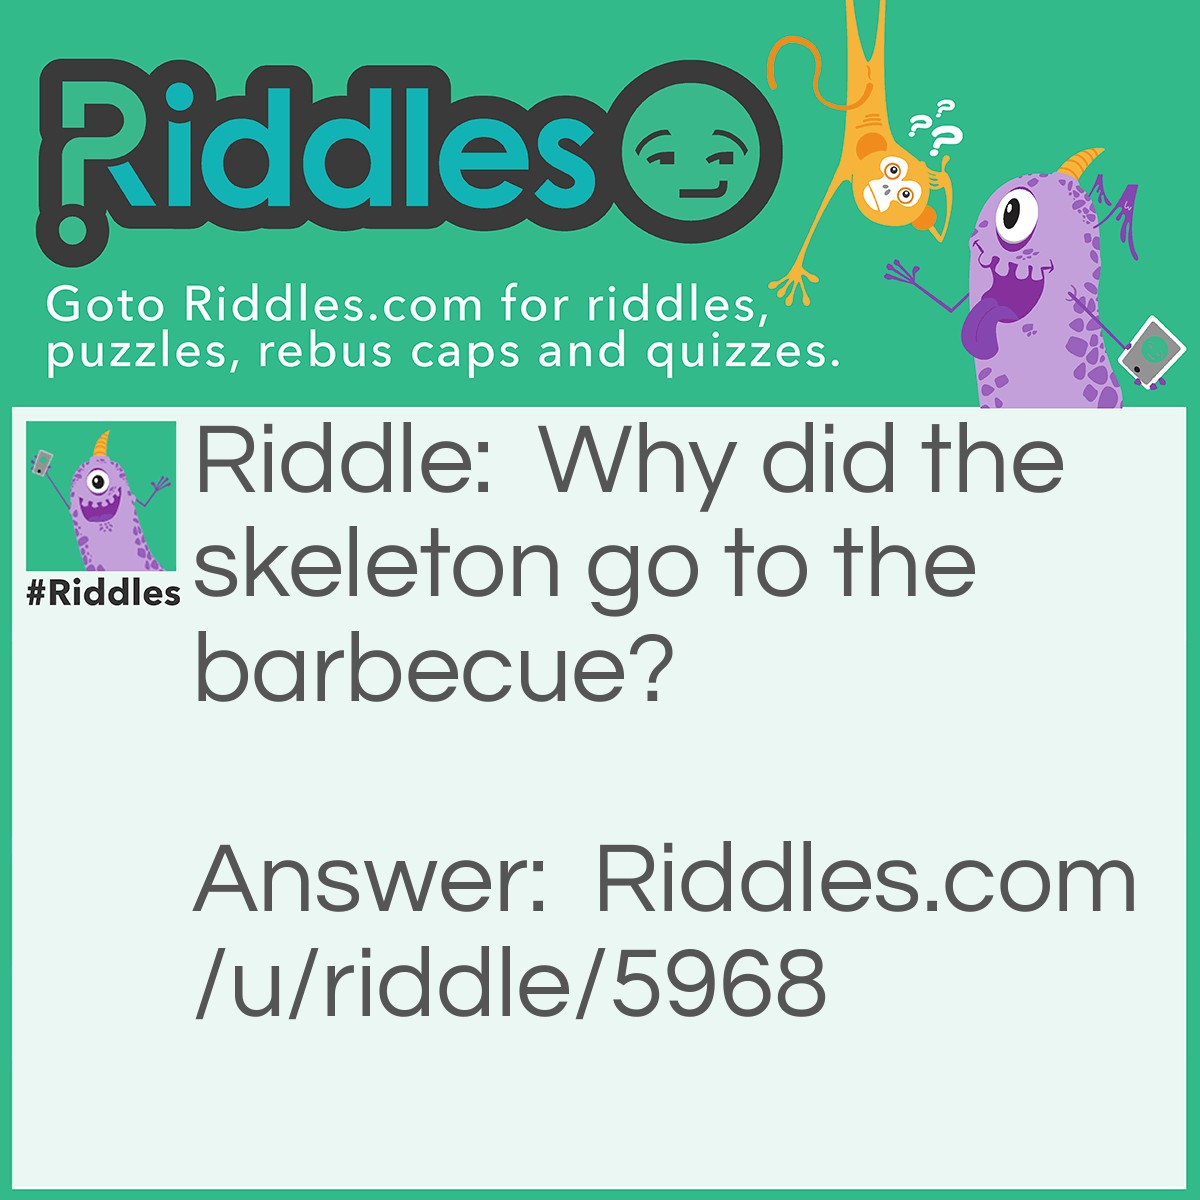 Riddle: Why did the skeleton go to the barbecue? Answer: To get some spare - ribs.